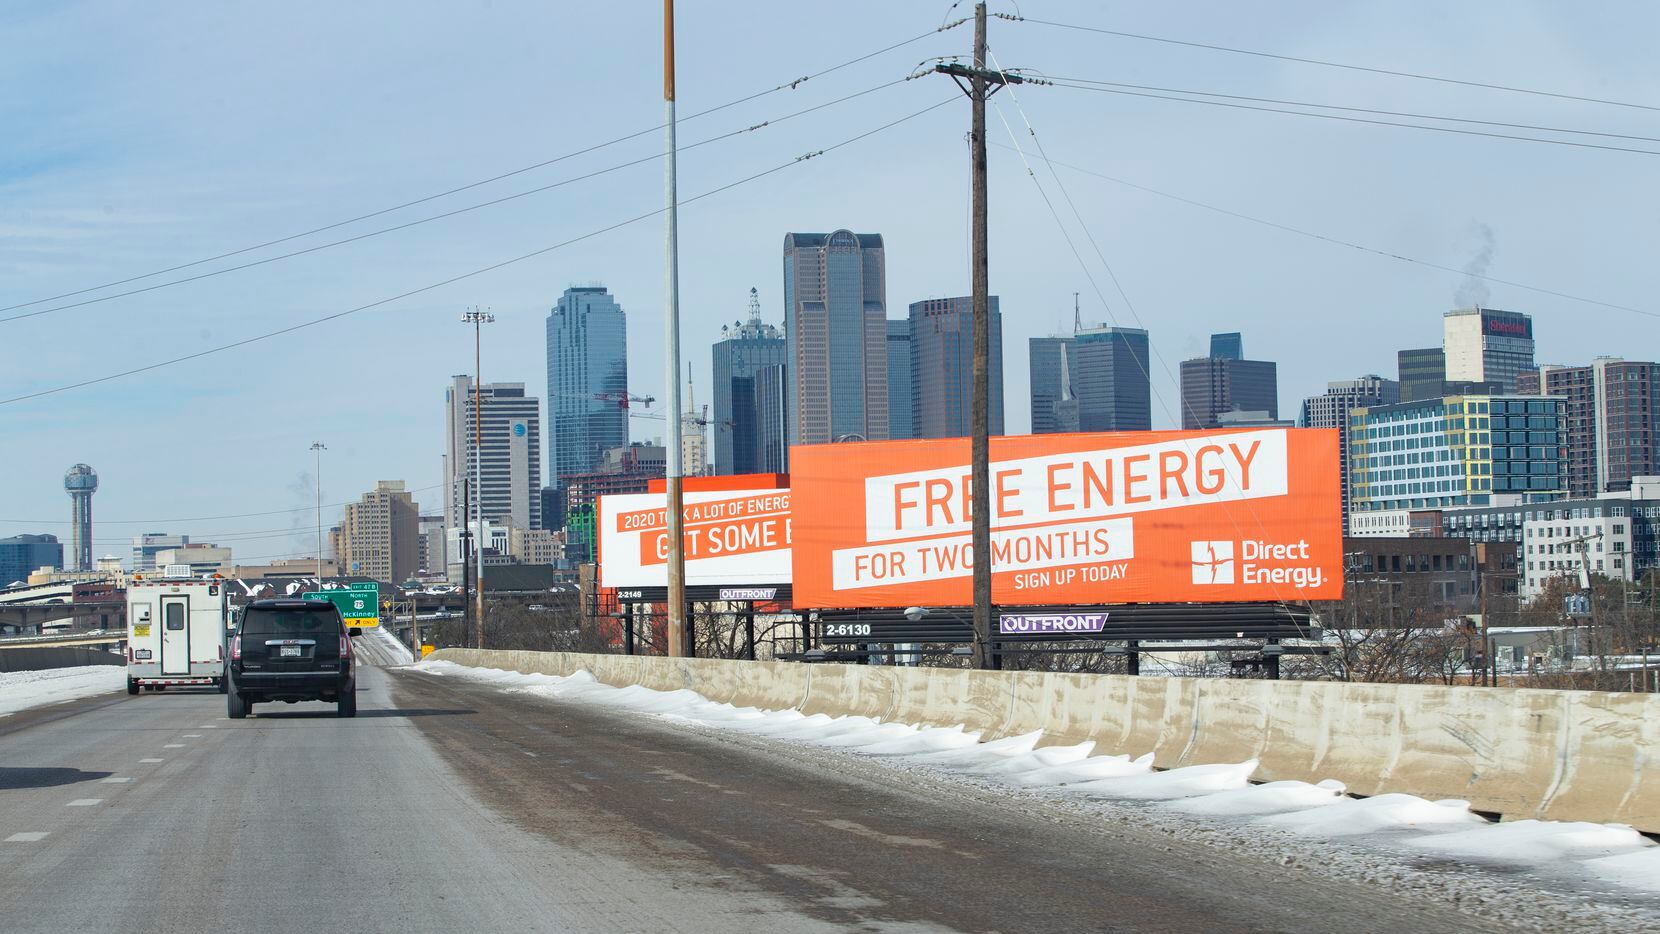 Downtown Dallas seen from I-30 on Tuesday, Feb. 16, 2021.